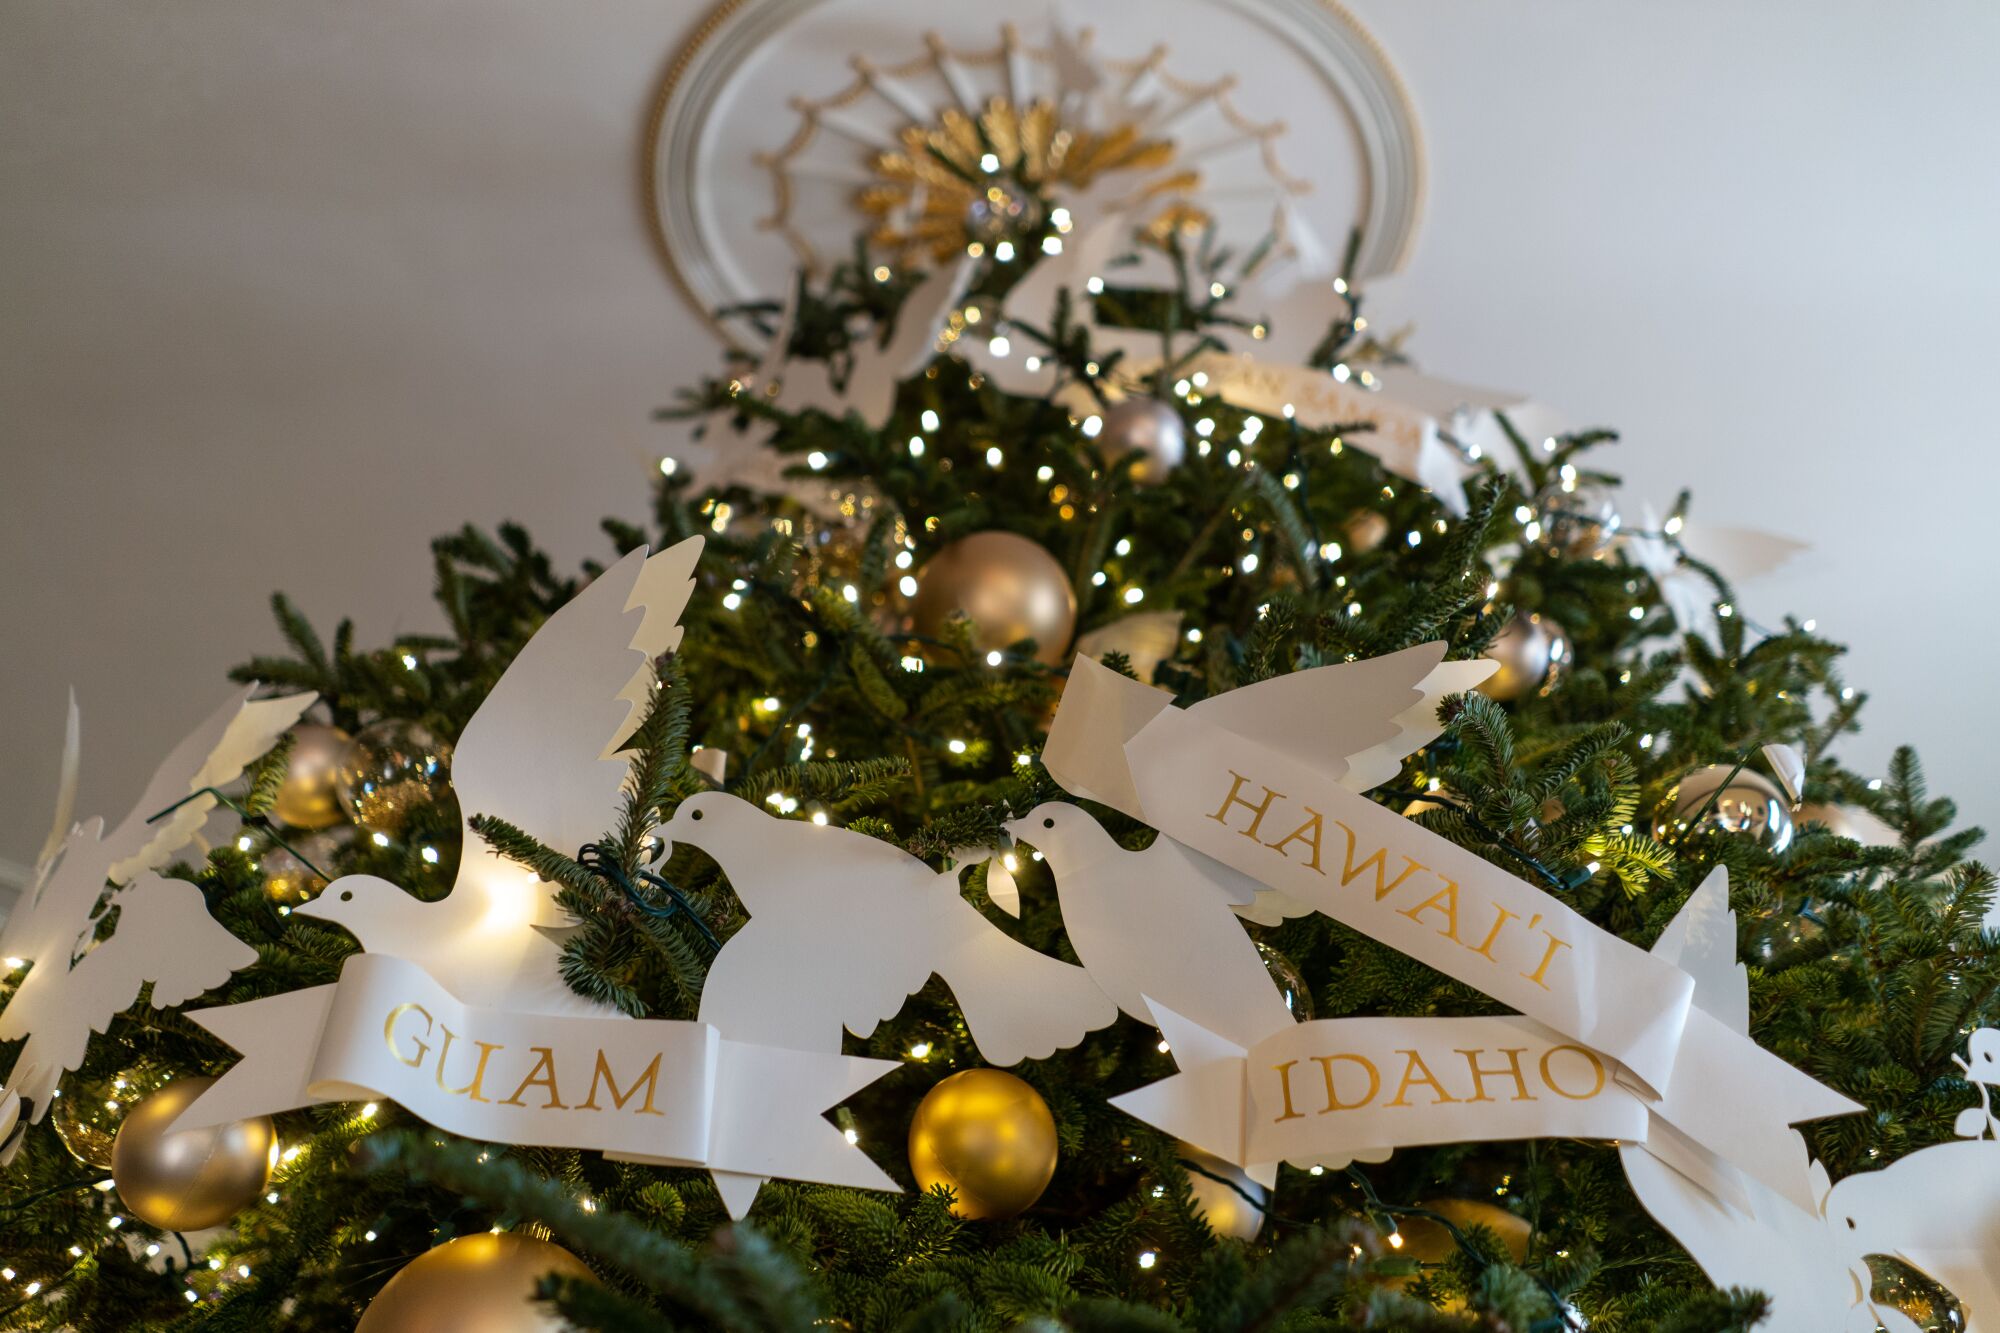 The official White House Christmas tree is decorated with ribbon showcasing the names of U.S. states and territories.